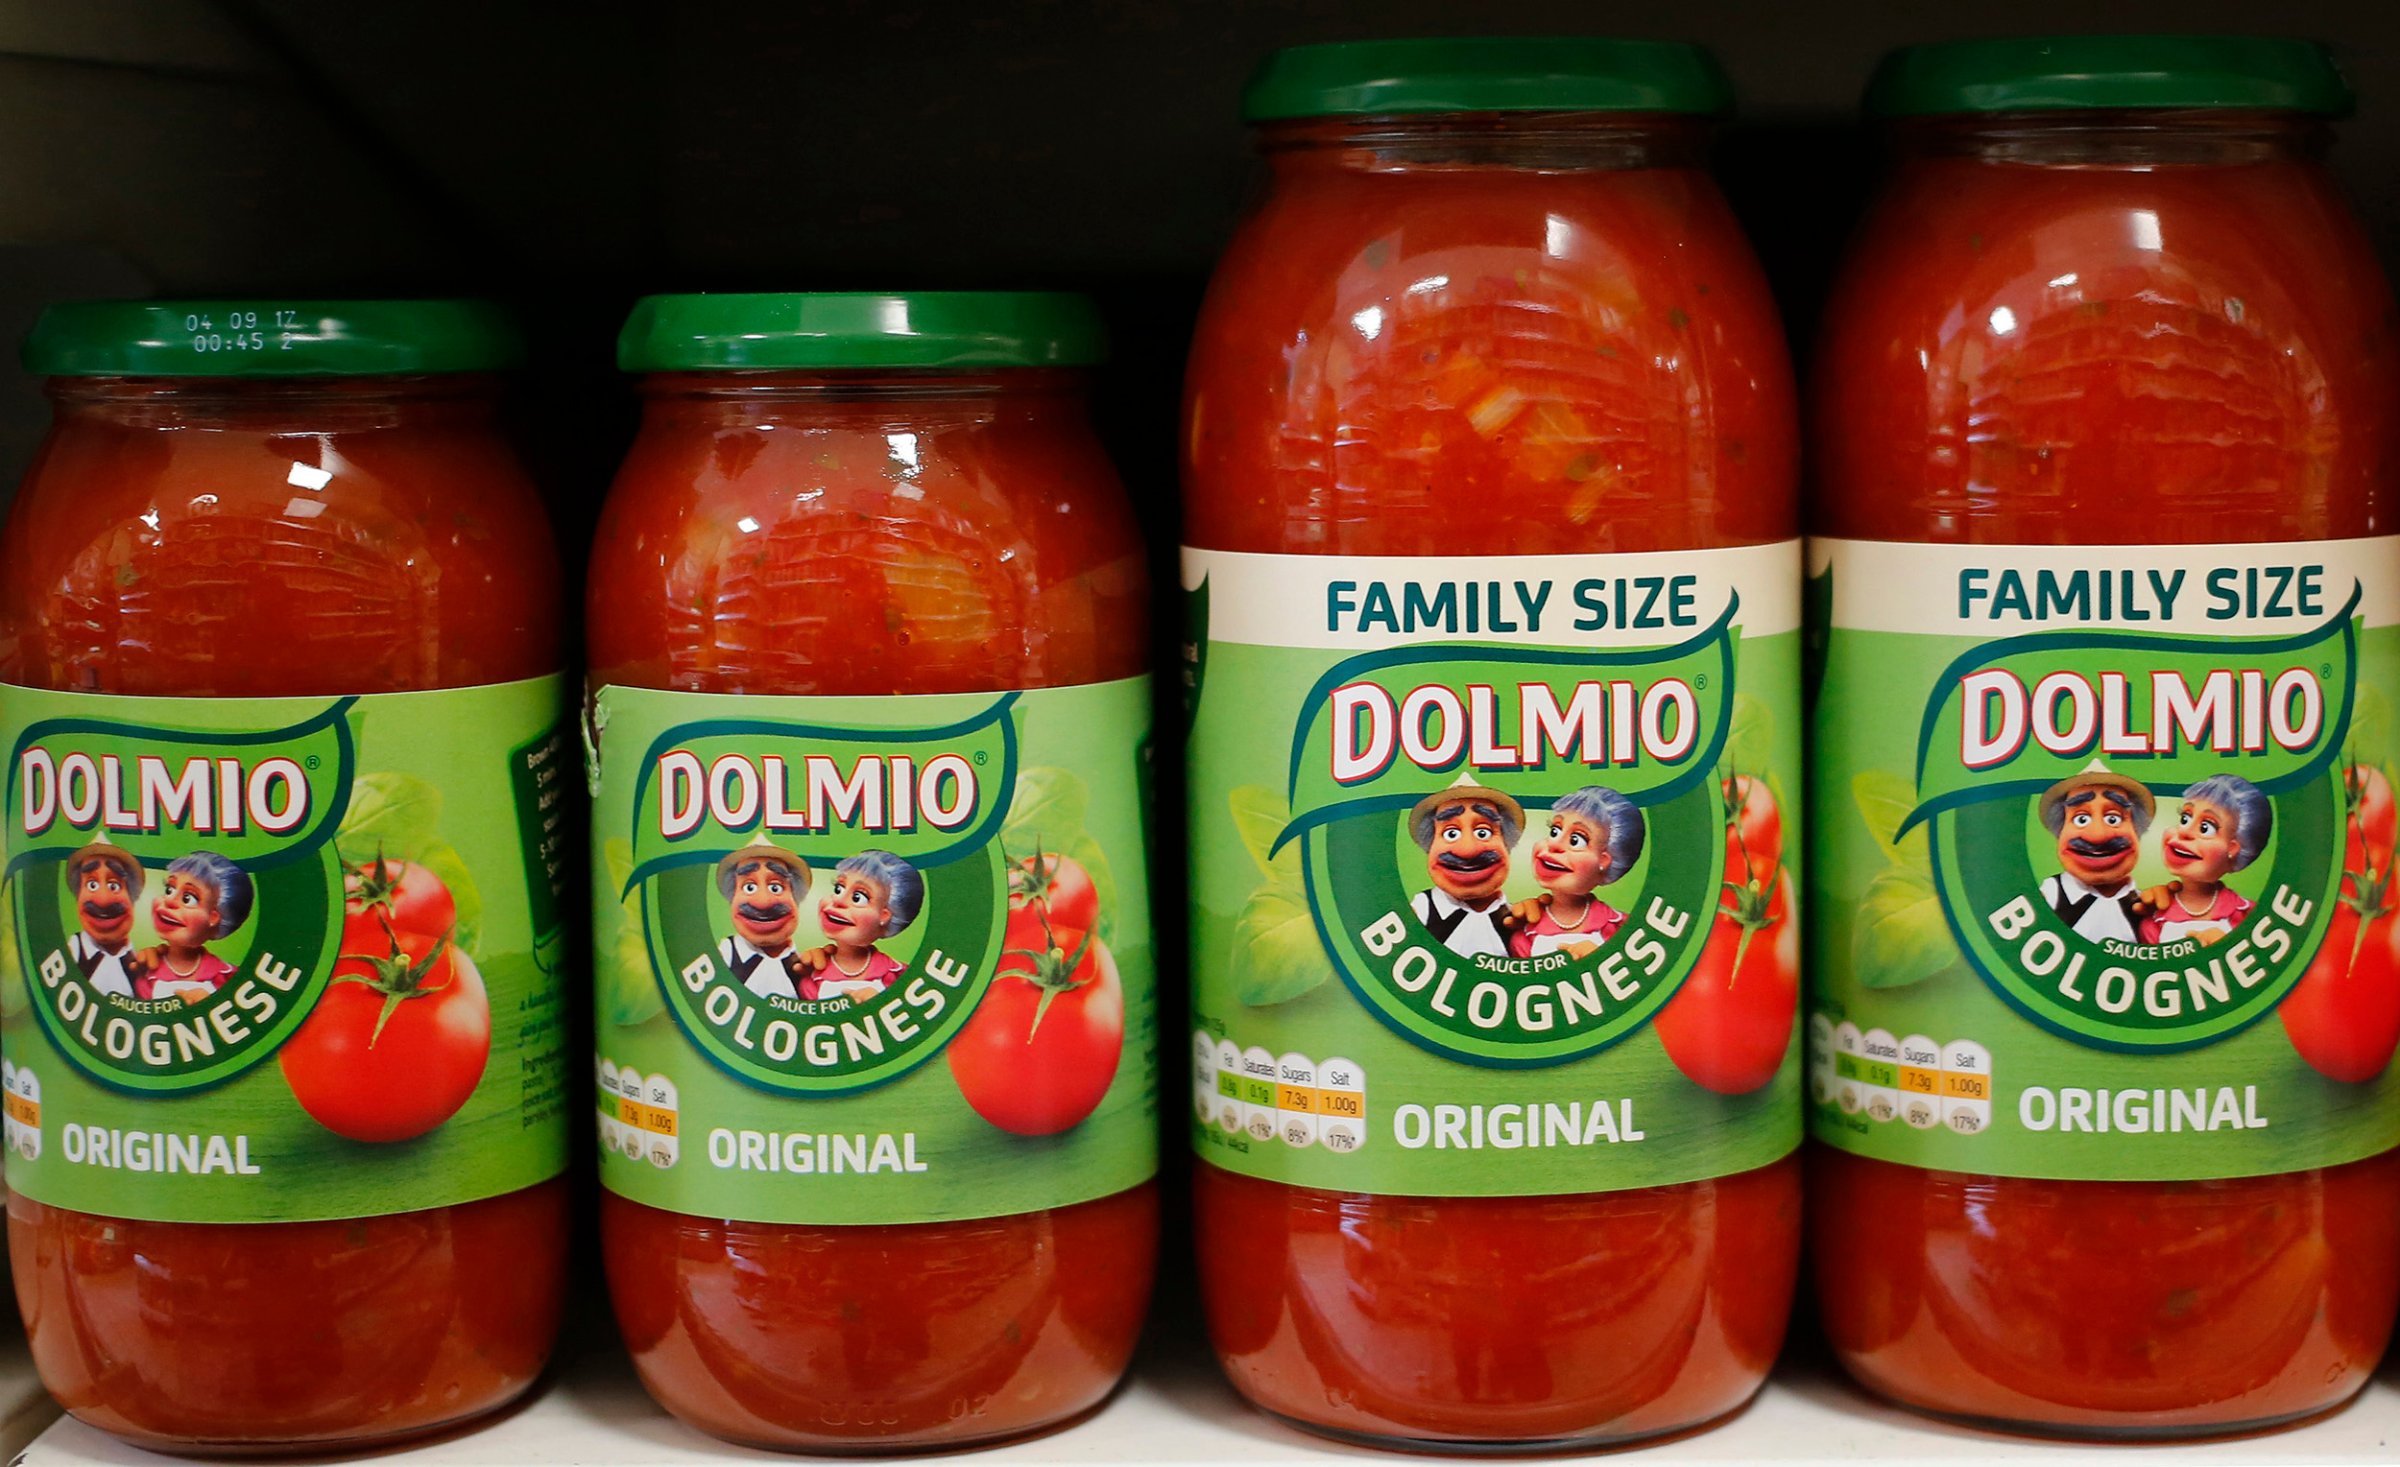 Dolmio pasta sauces are seen in a store in in London on April 15, 2016.